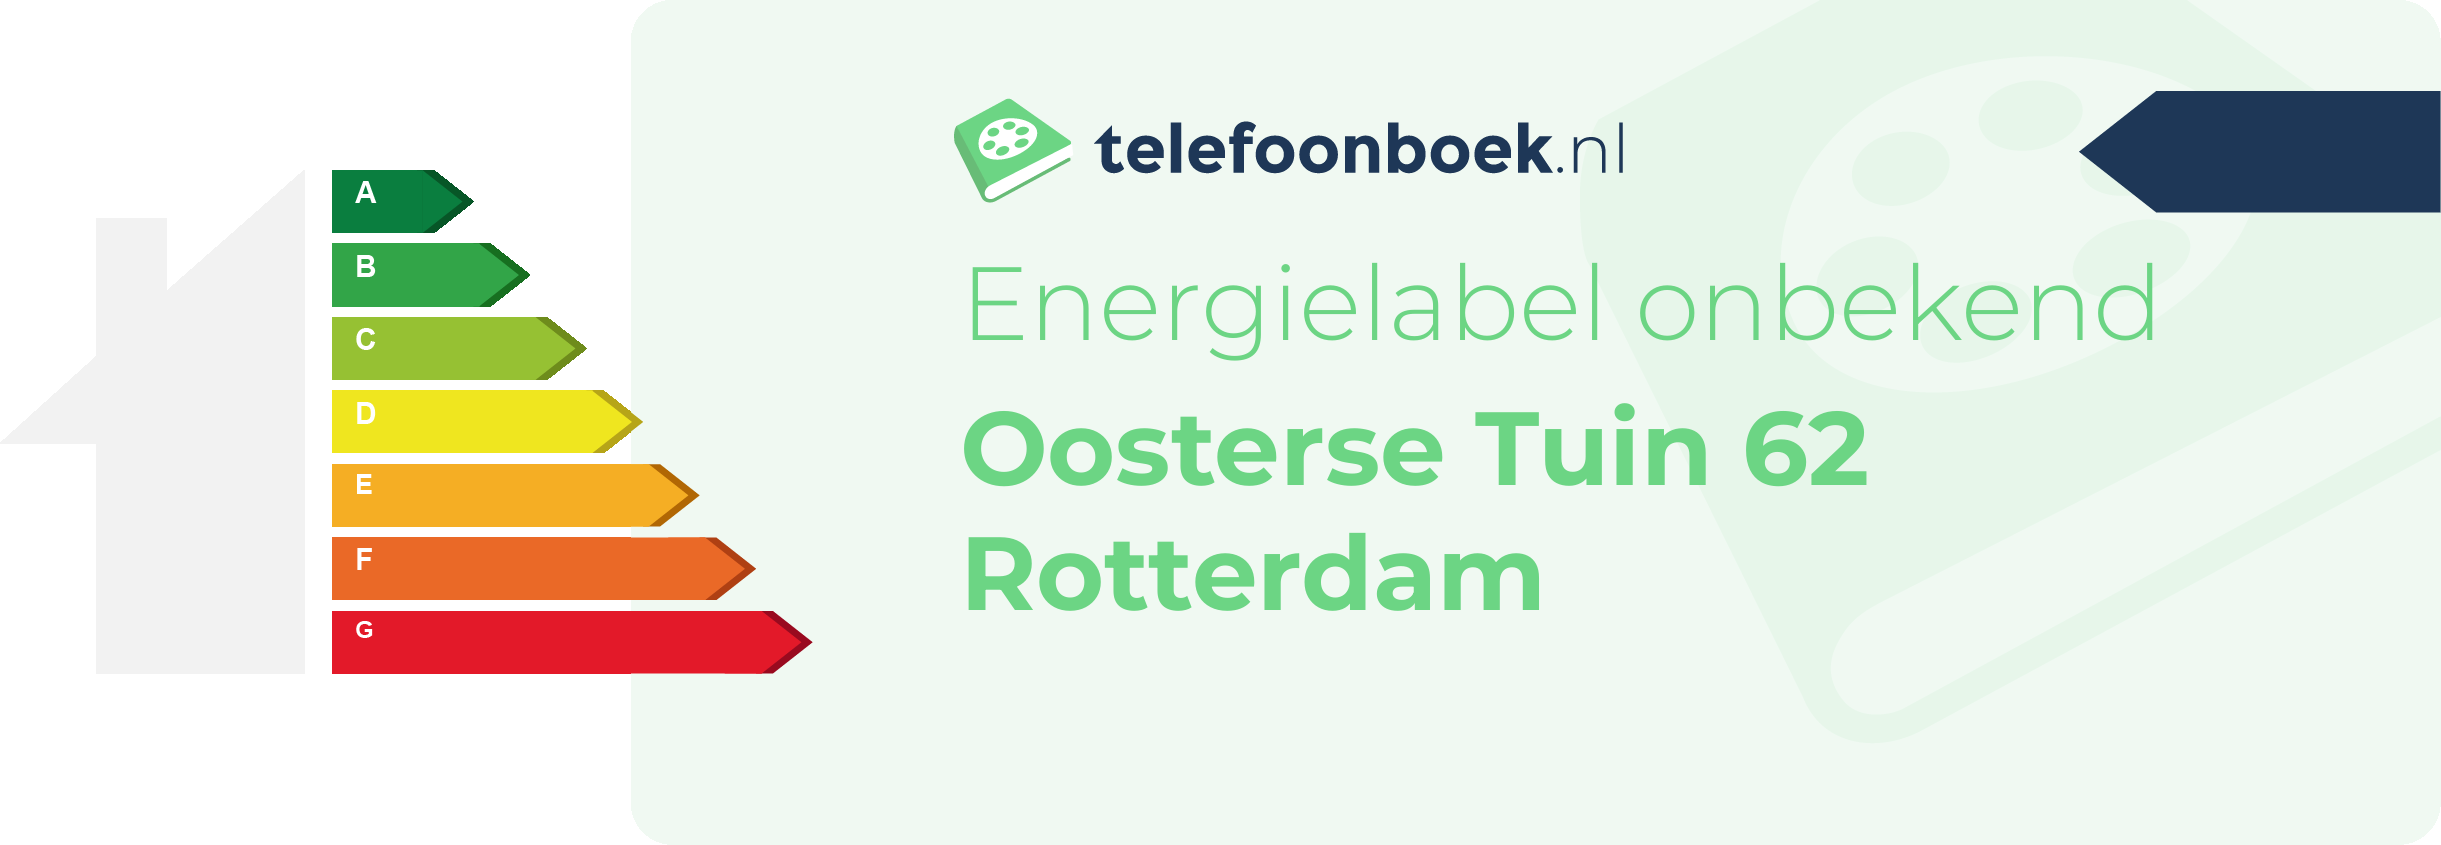 Energielabel Oosterse Tuin 62 Rotterdam